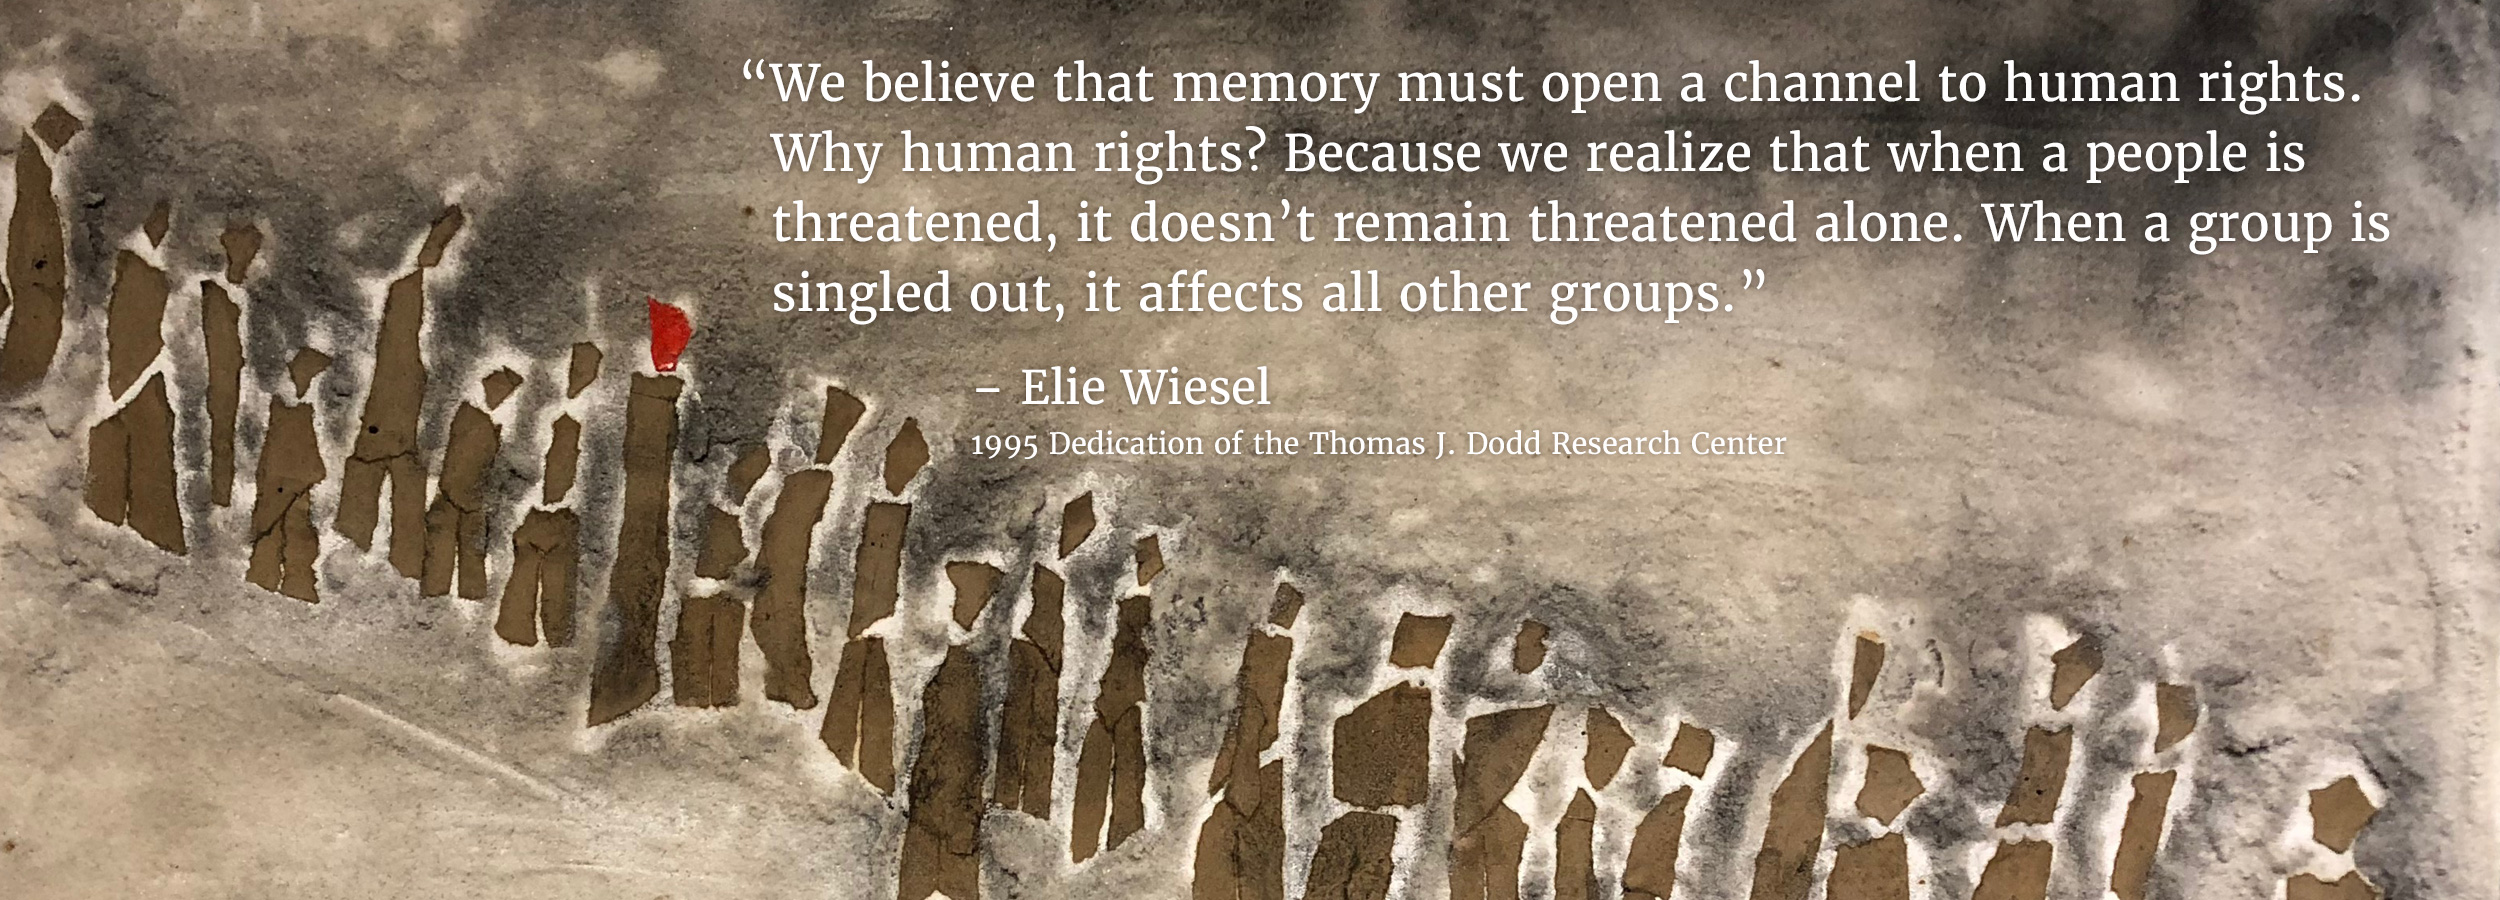 “We believe that that memory must open a channel to human rights. Why human rights? Because we realize that when a people is threatened, it doesn’t remain threatened alone. When a group is singled out, it affects all other groups.” – Elie Wiesel